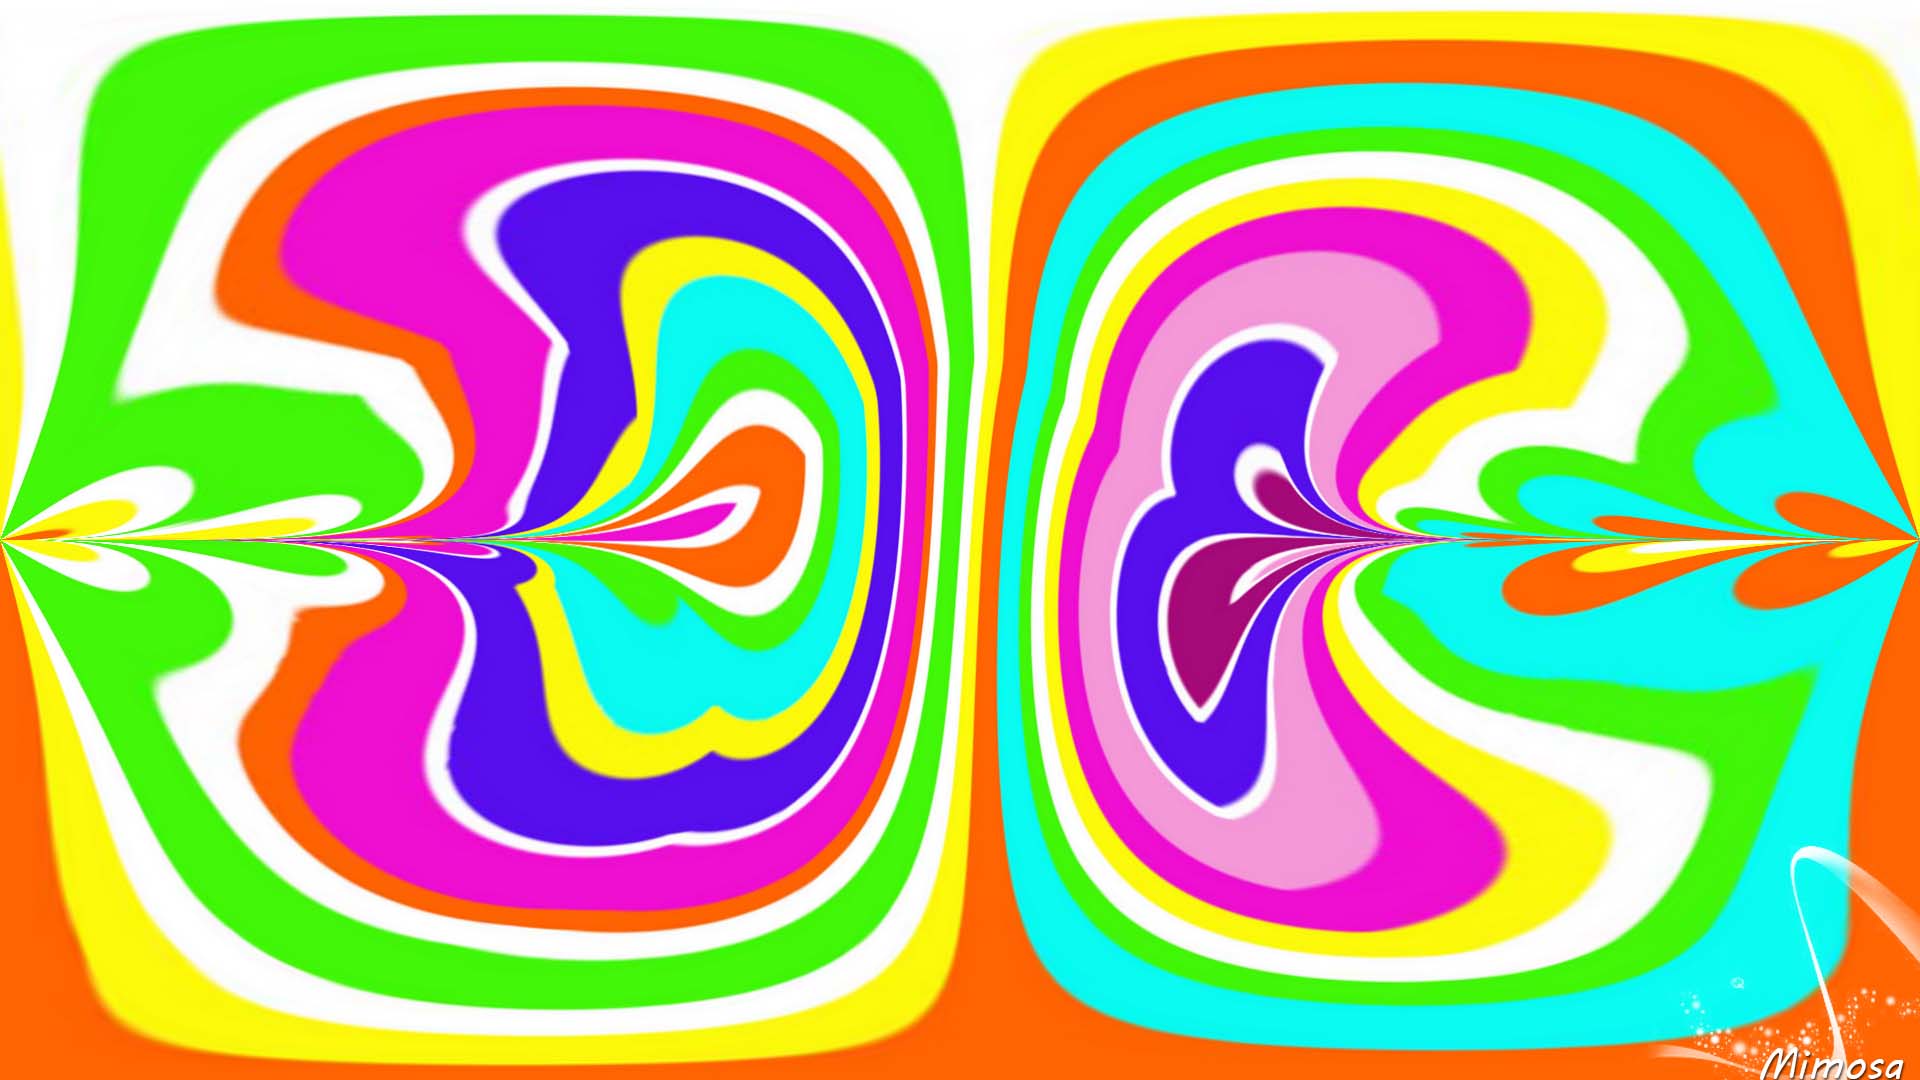 Abstract Colorful Digital Art Shapes 1920x1080